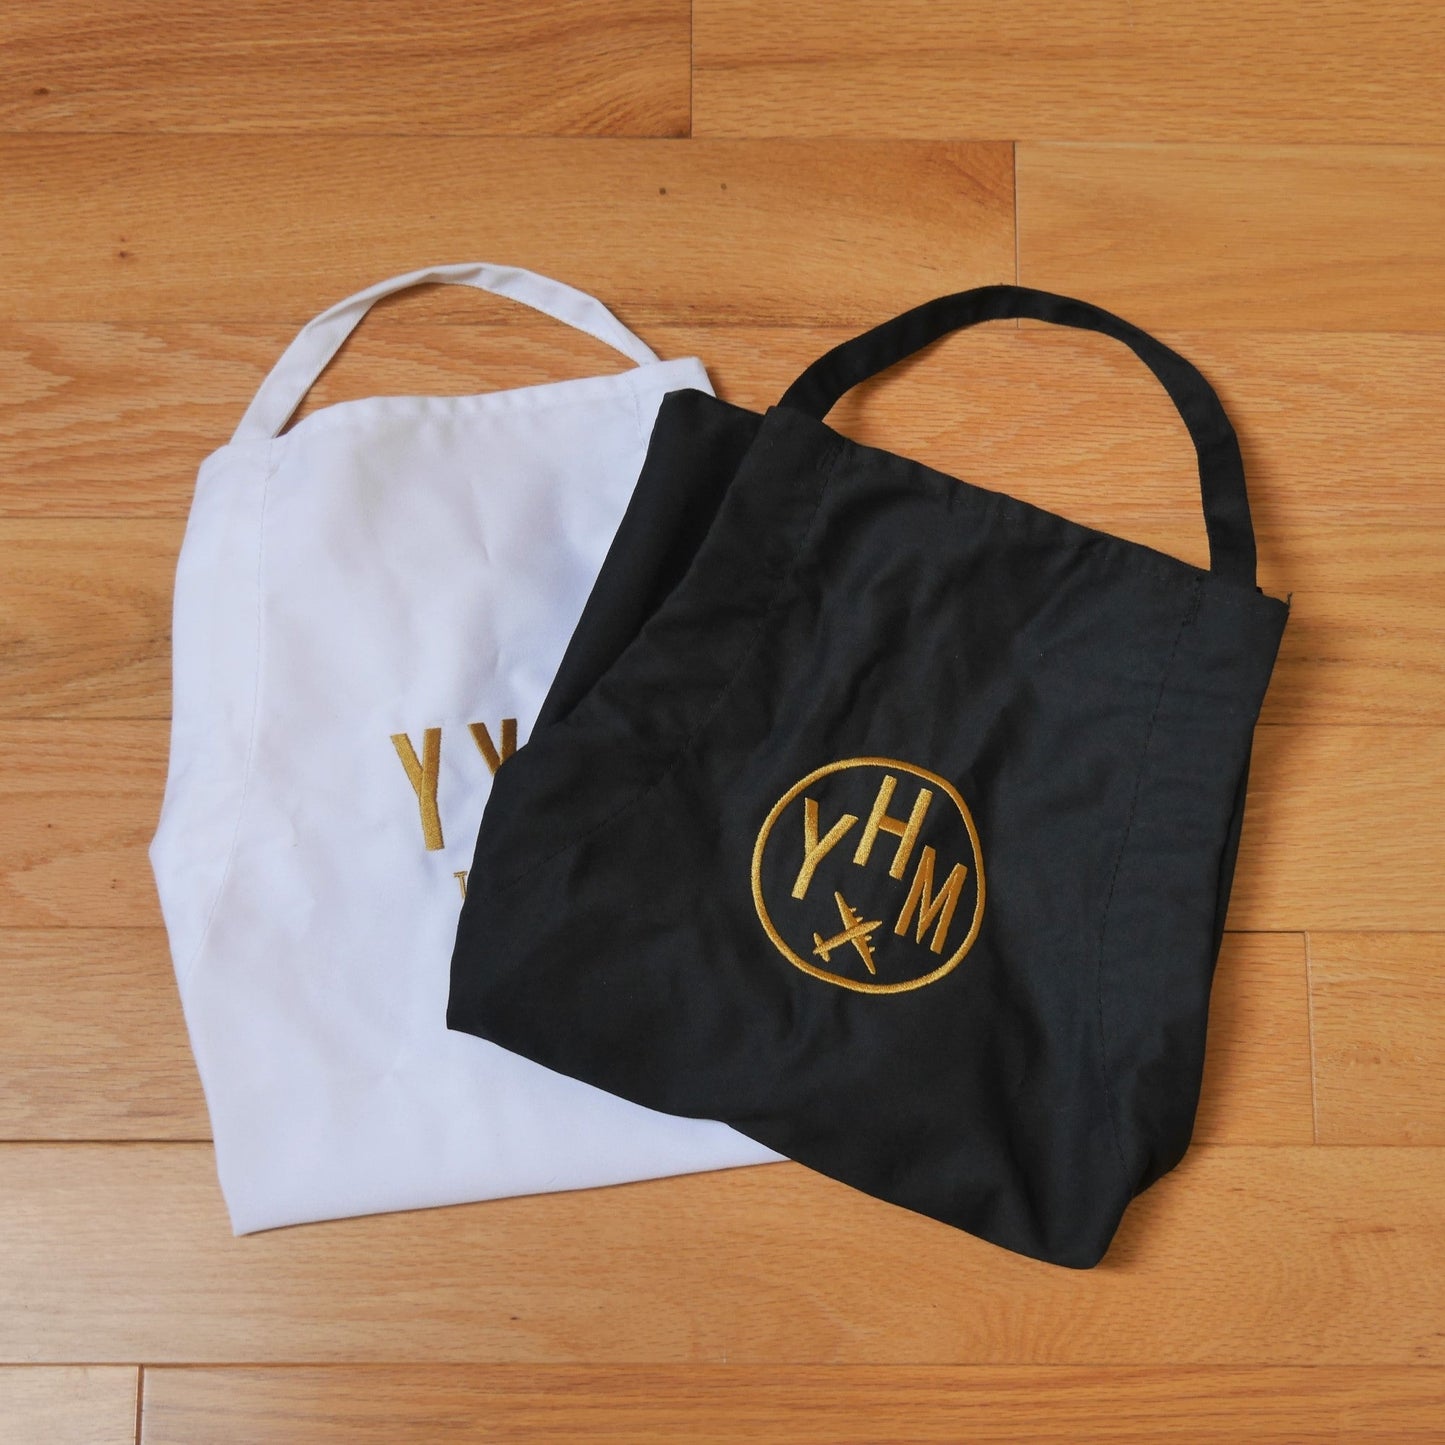 City Embroidered Apron - Old Gold • AMS Amsterdam • YHM Designs - Image 14